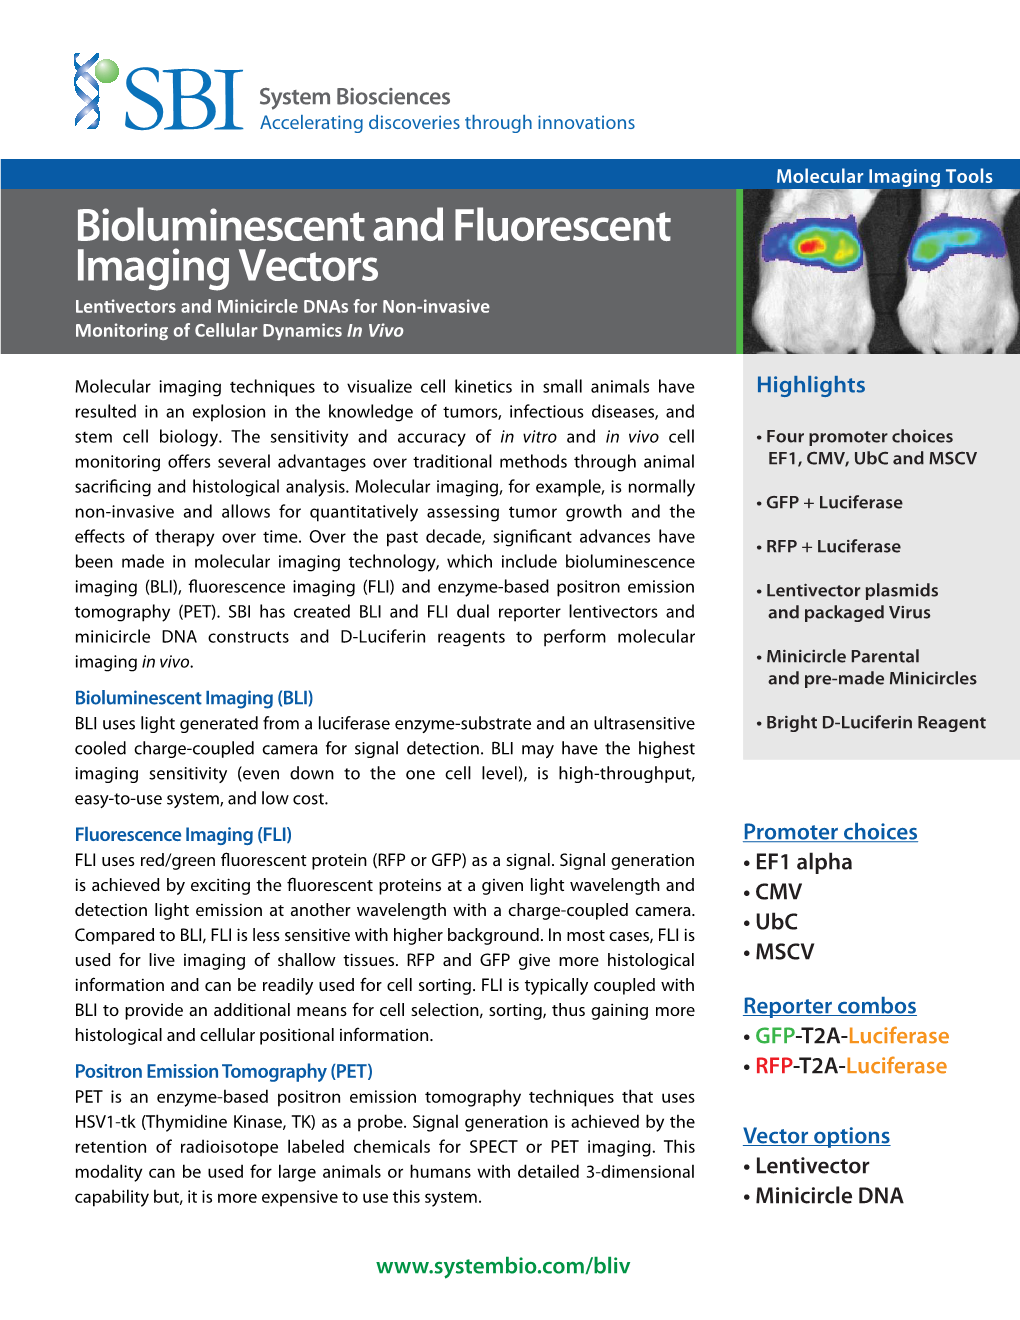 Bioluminescent and Fluorescent Imaging Vectors Lentivectors and Minicircle Dnas for Non-Invasive Monitoring of Cellular Dynamics in Vivo